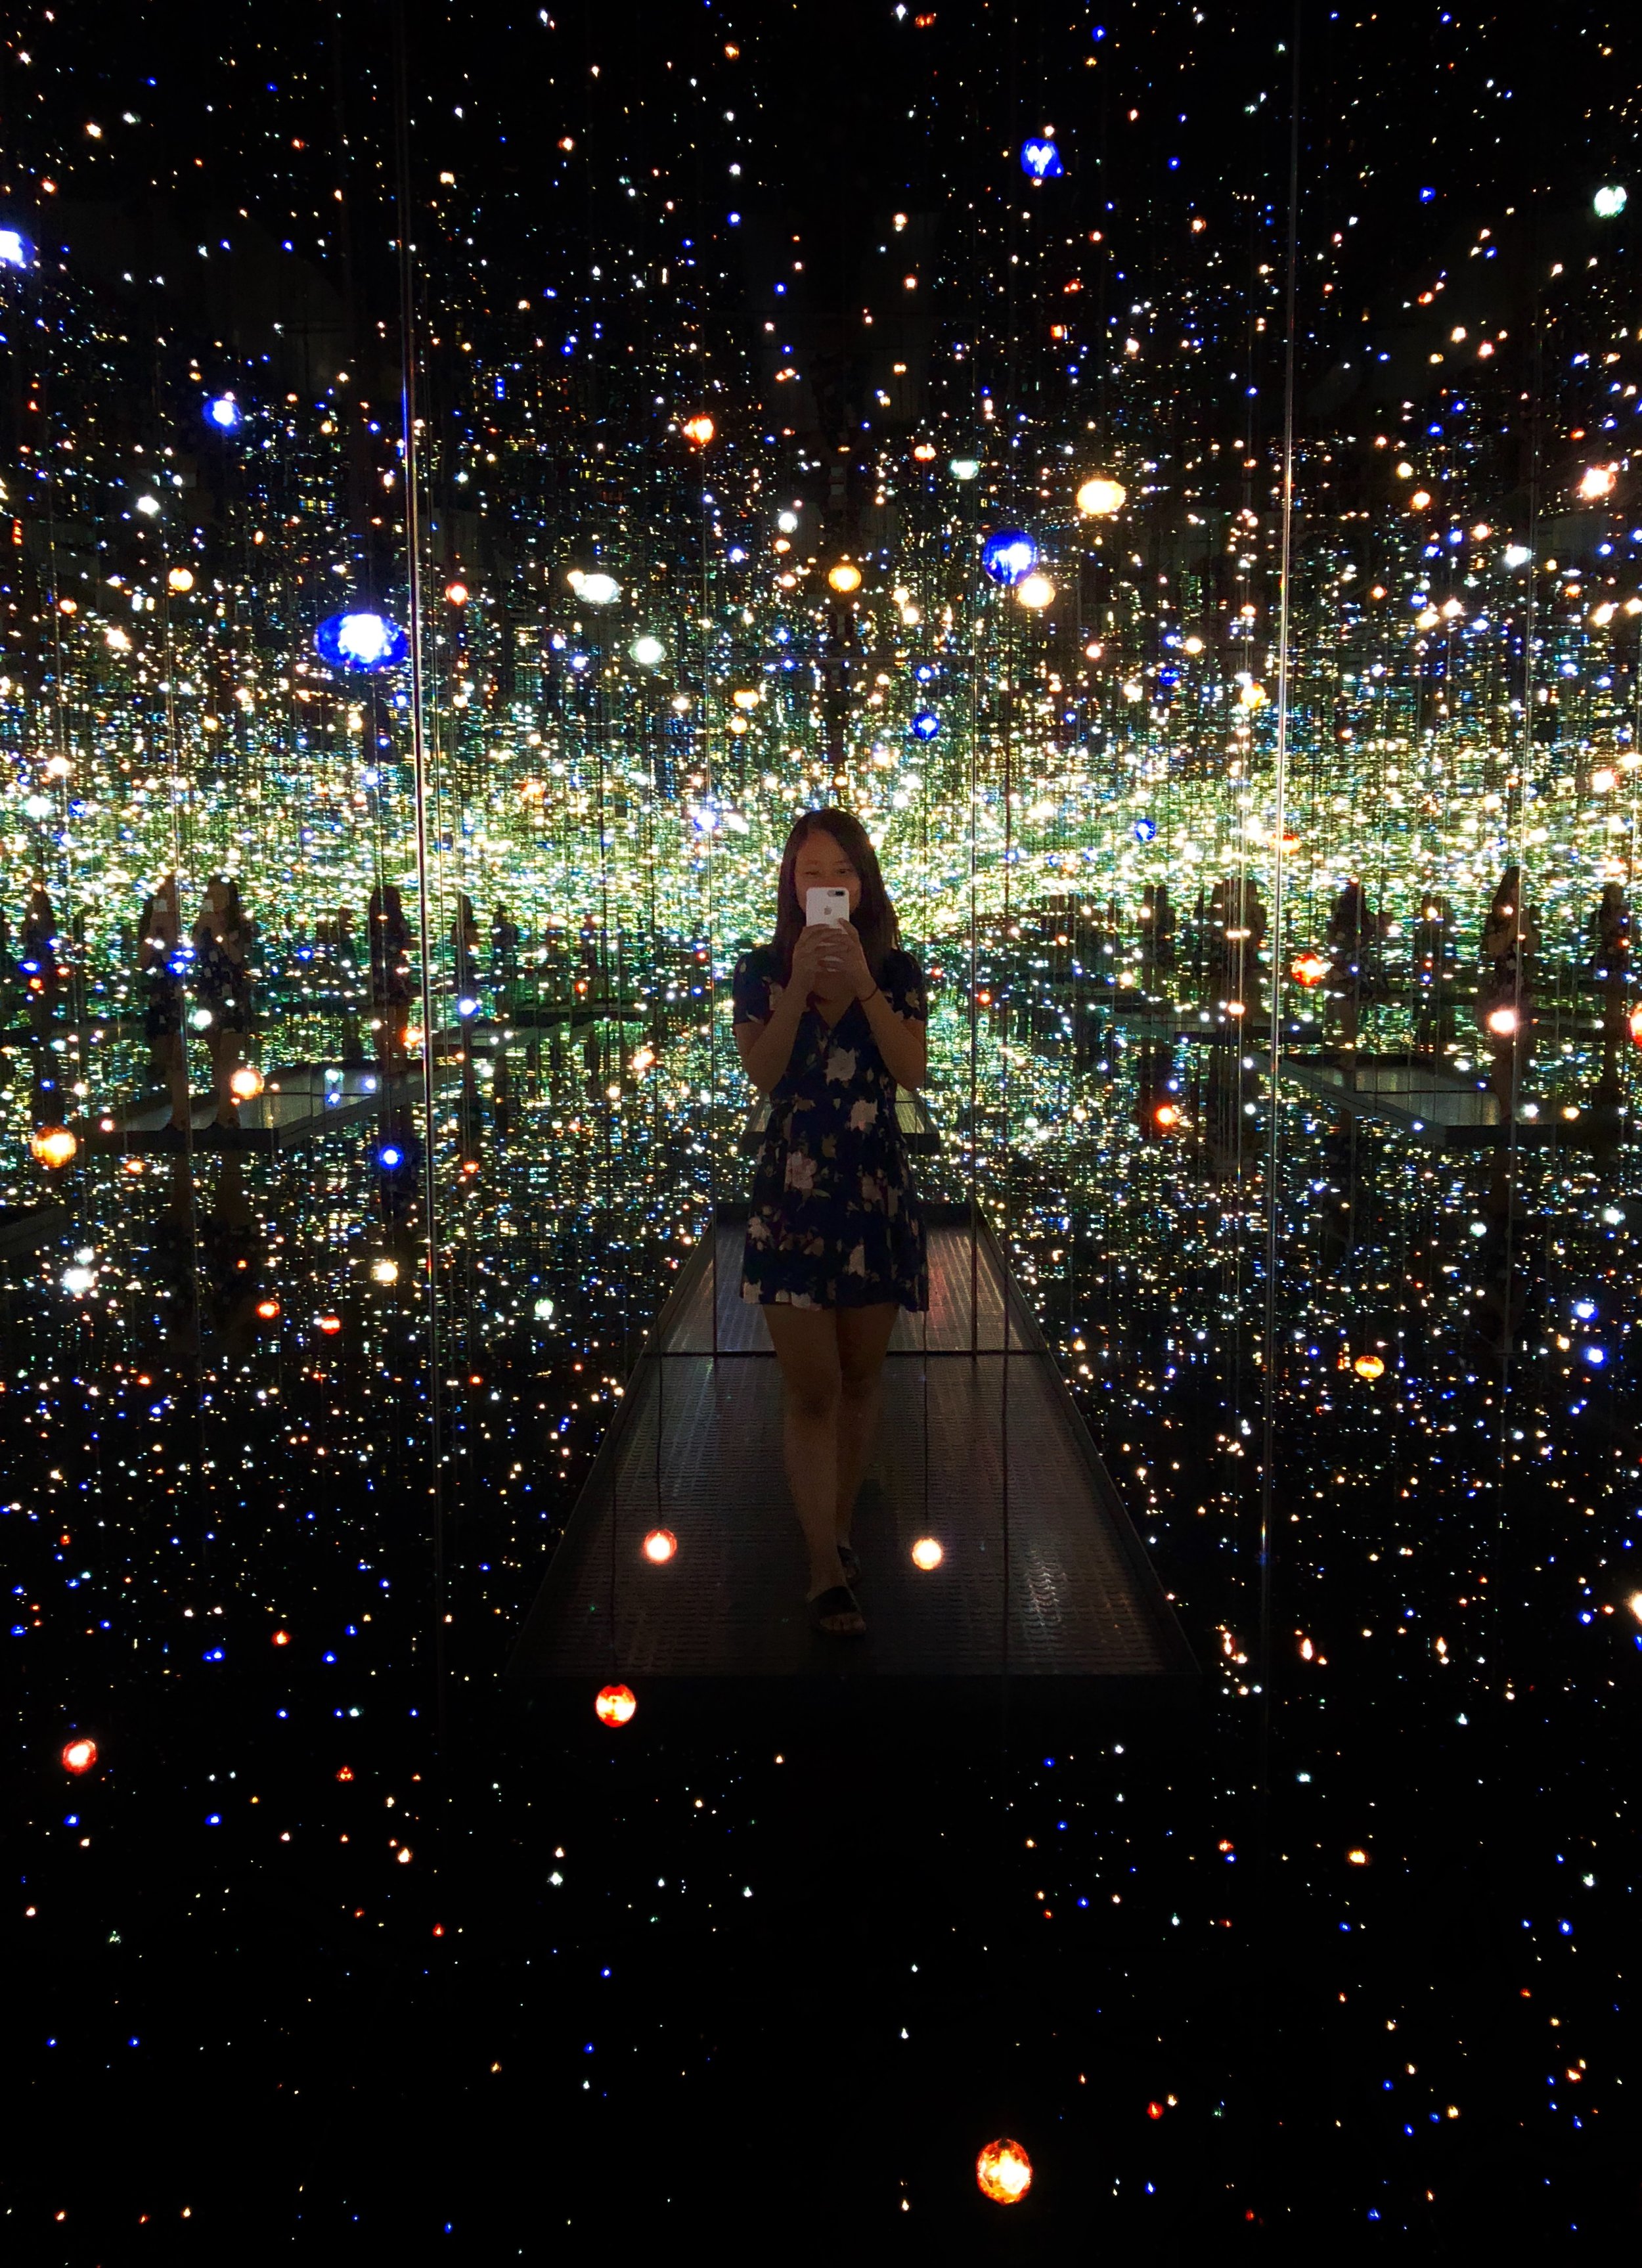 The Broad How To See The Infinity Mirrored Rooms Cloris